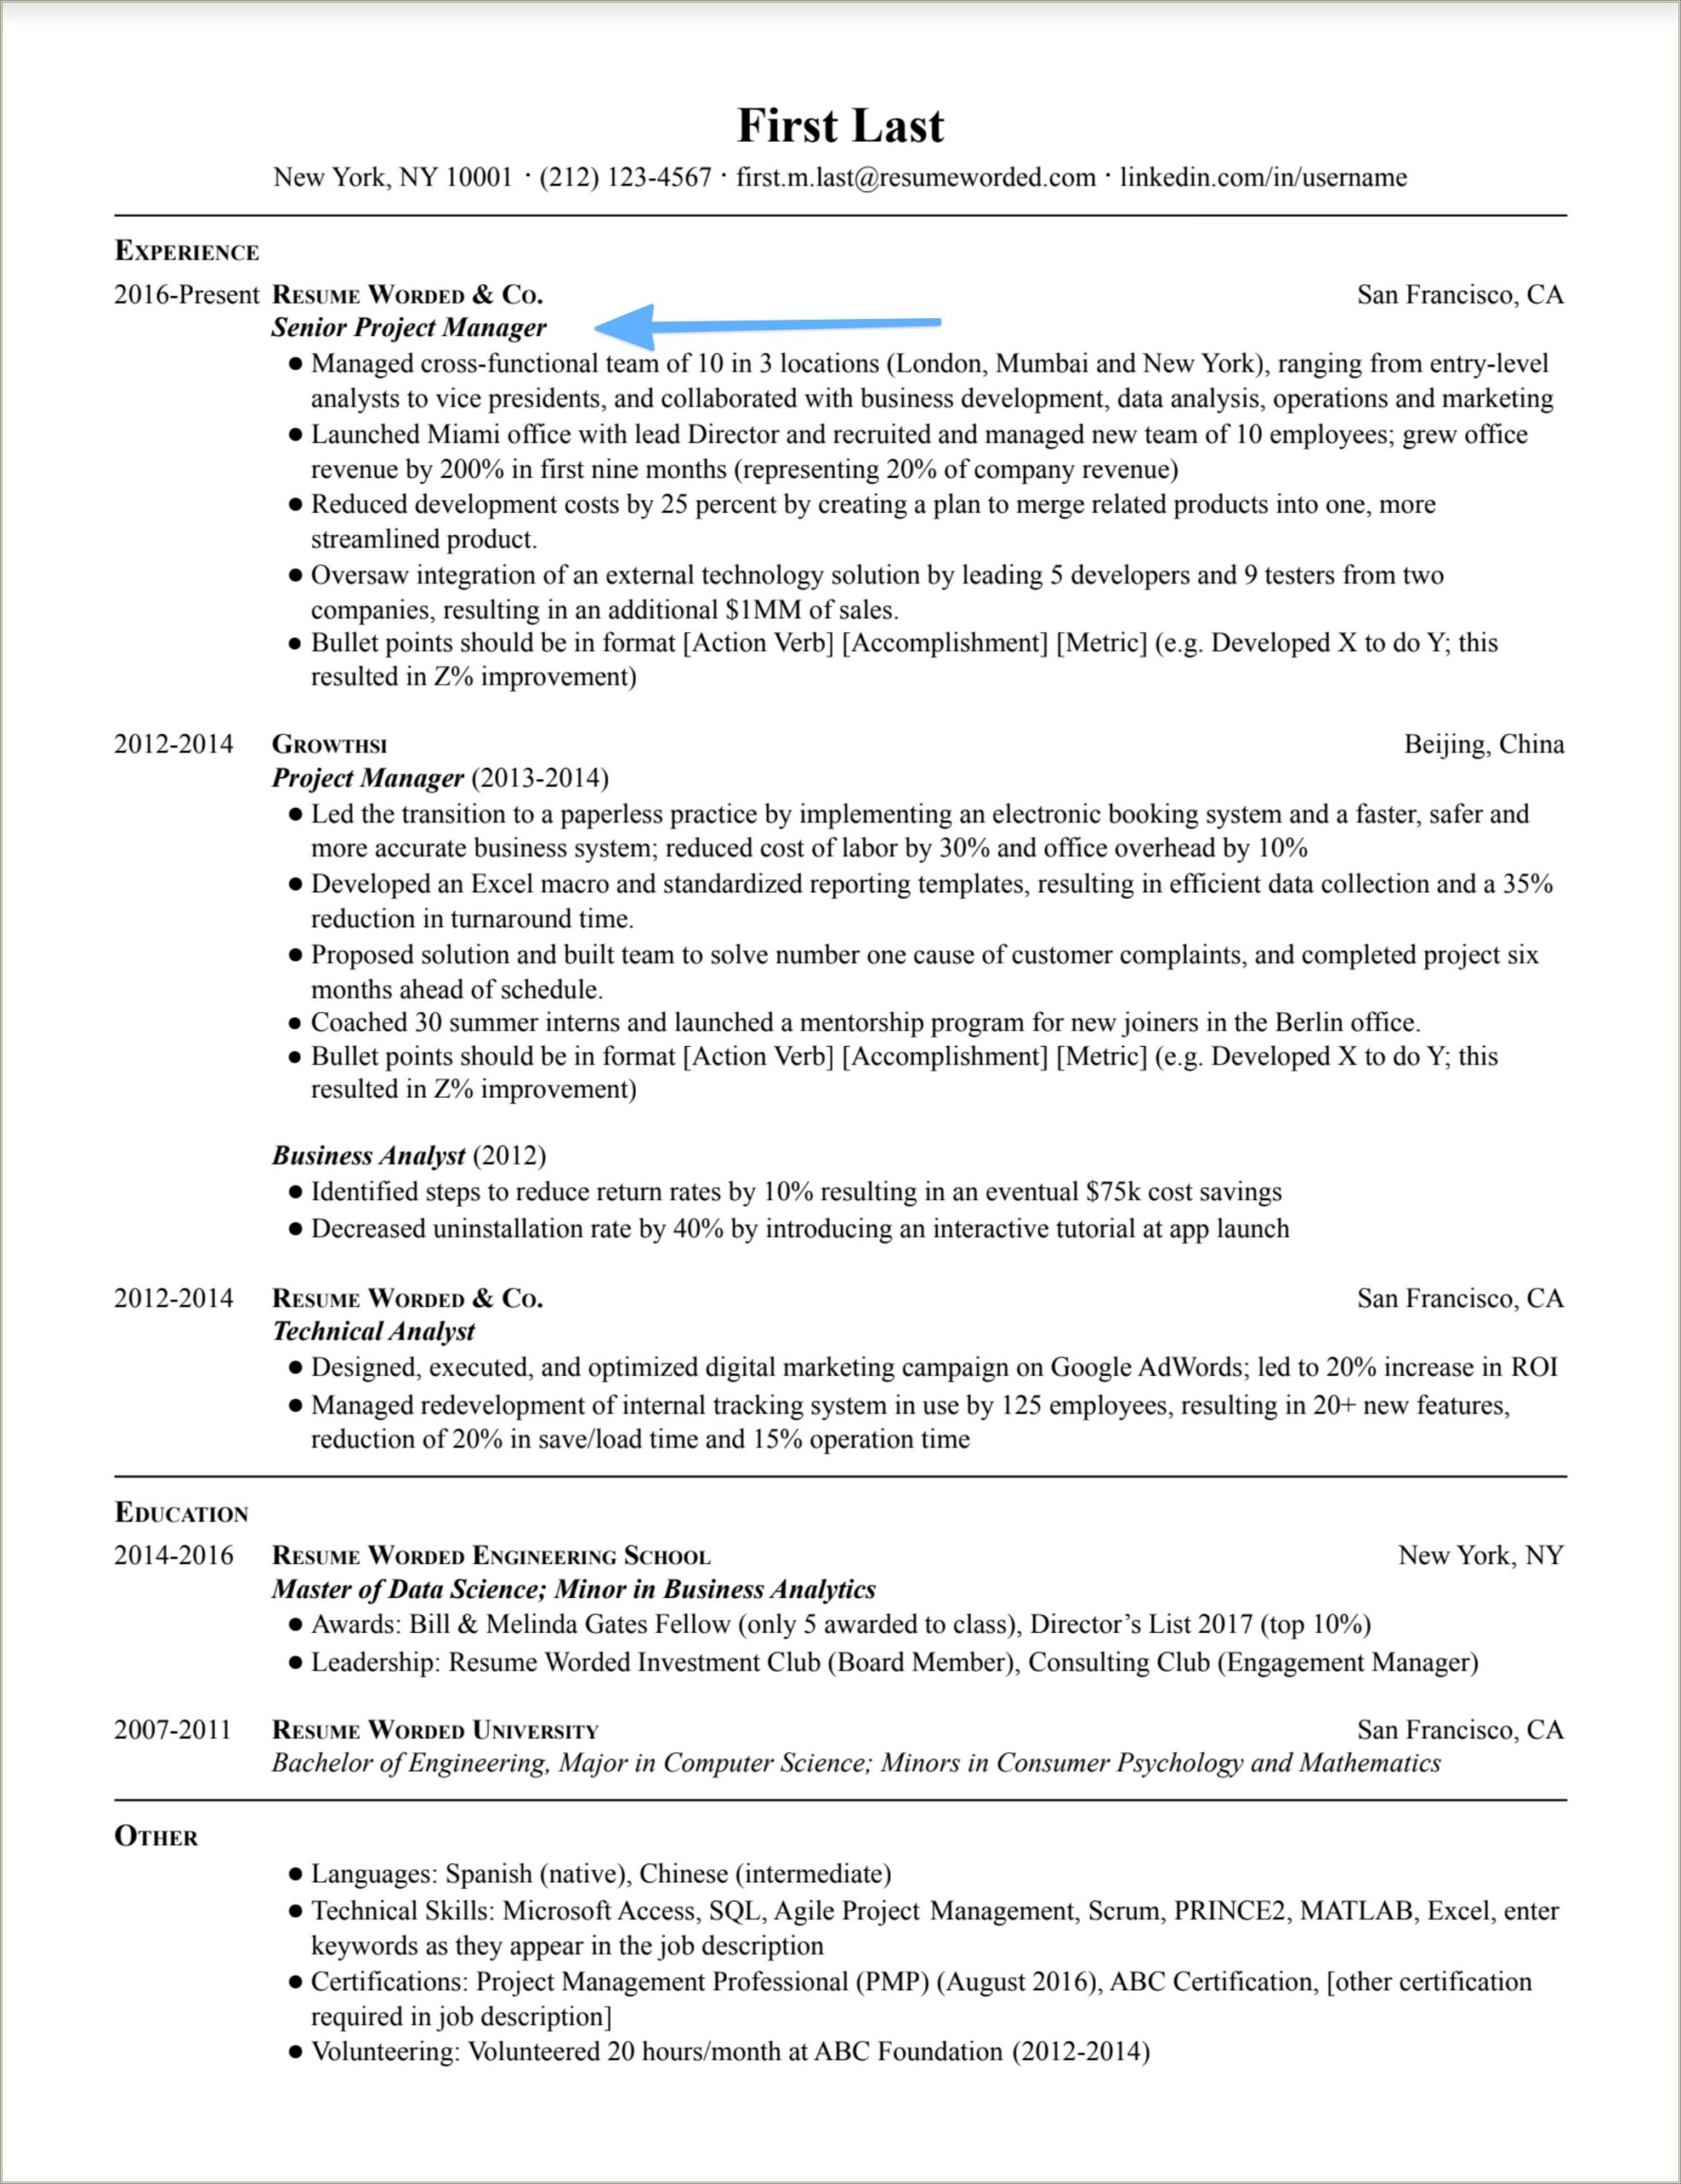 Sample Resume Format For Project Manager